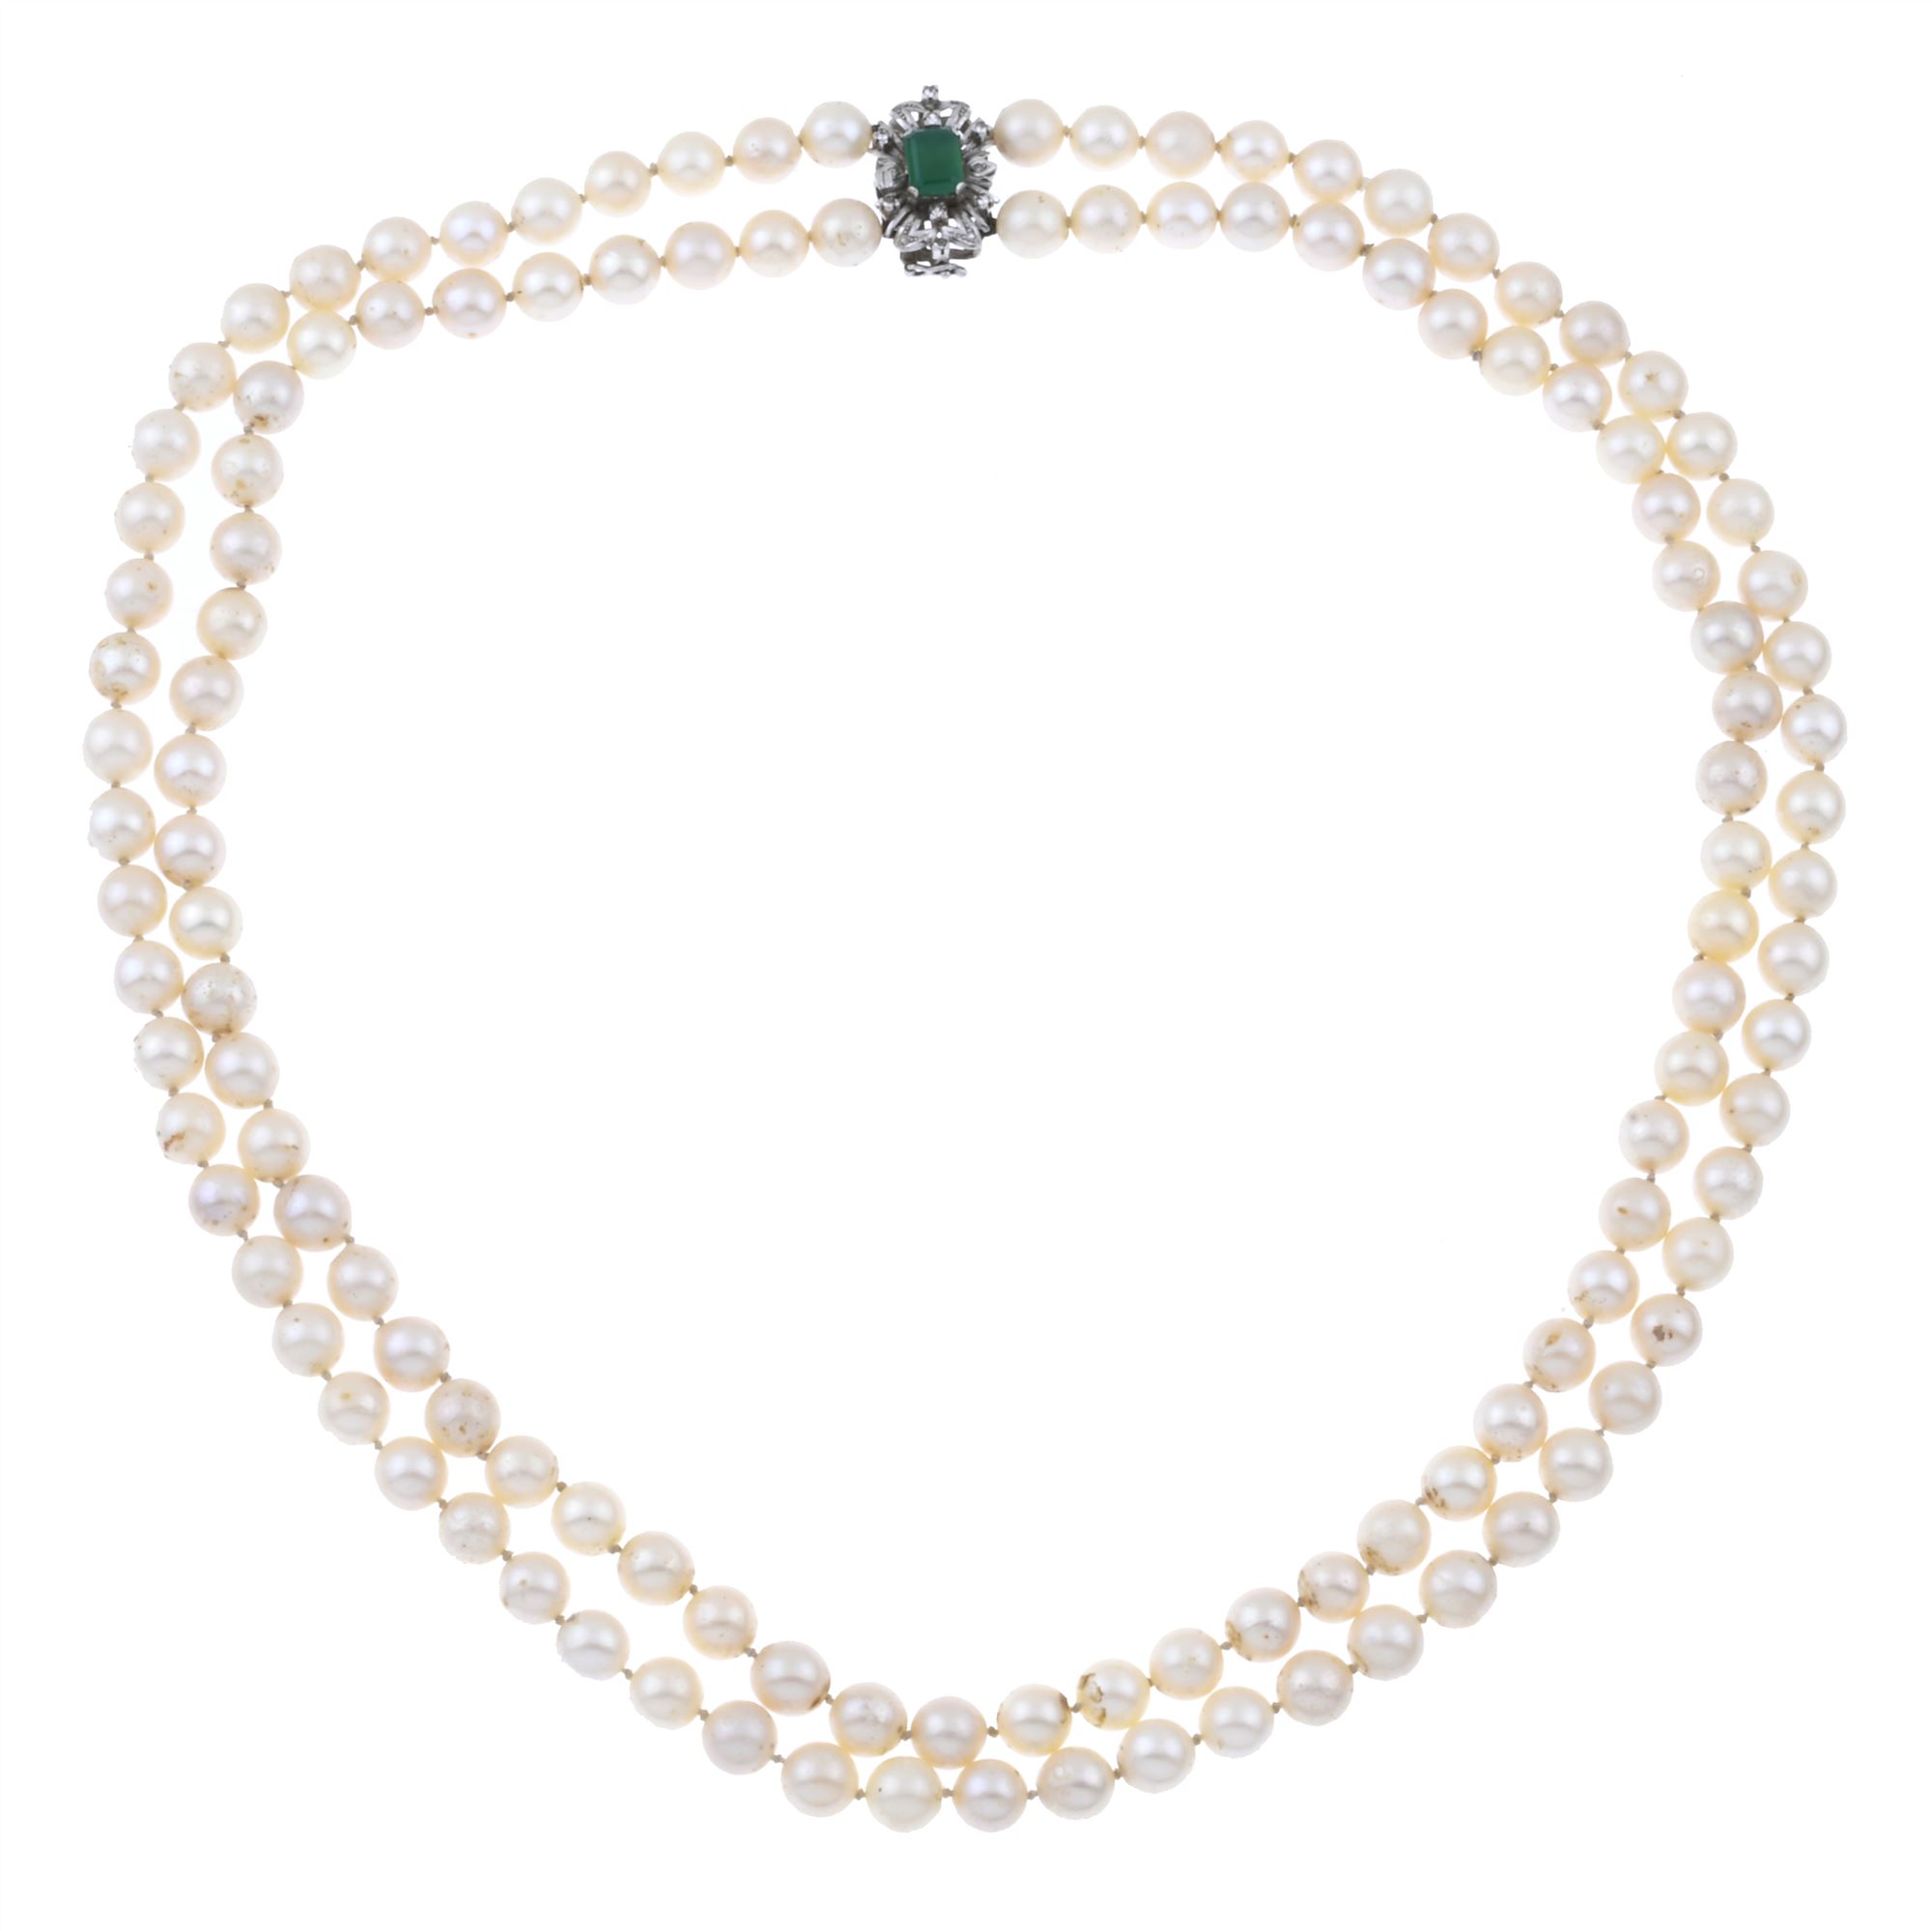 PEARLS NECKLACE WITH EMERALD.